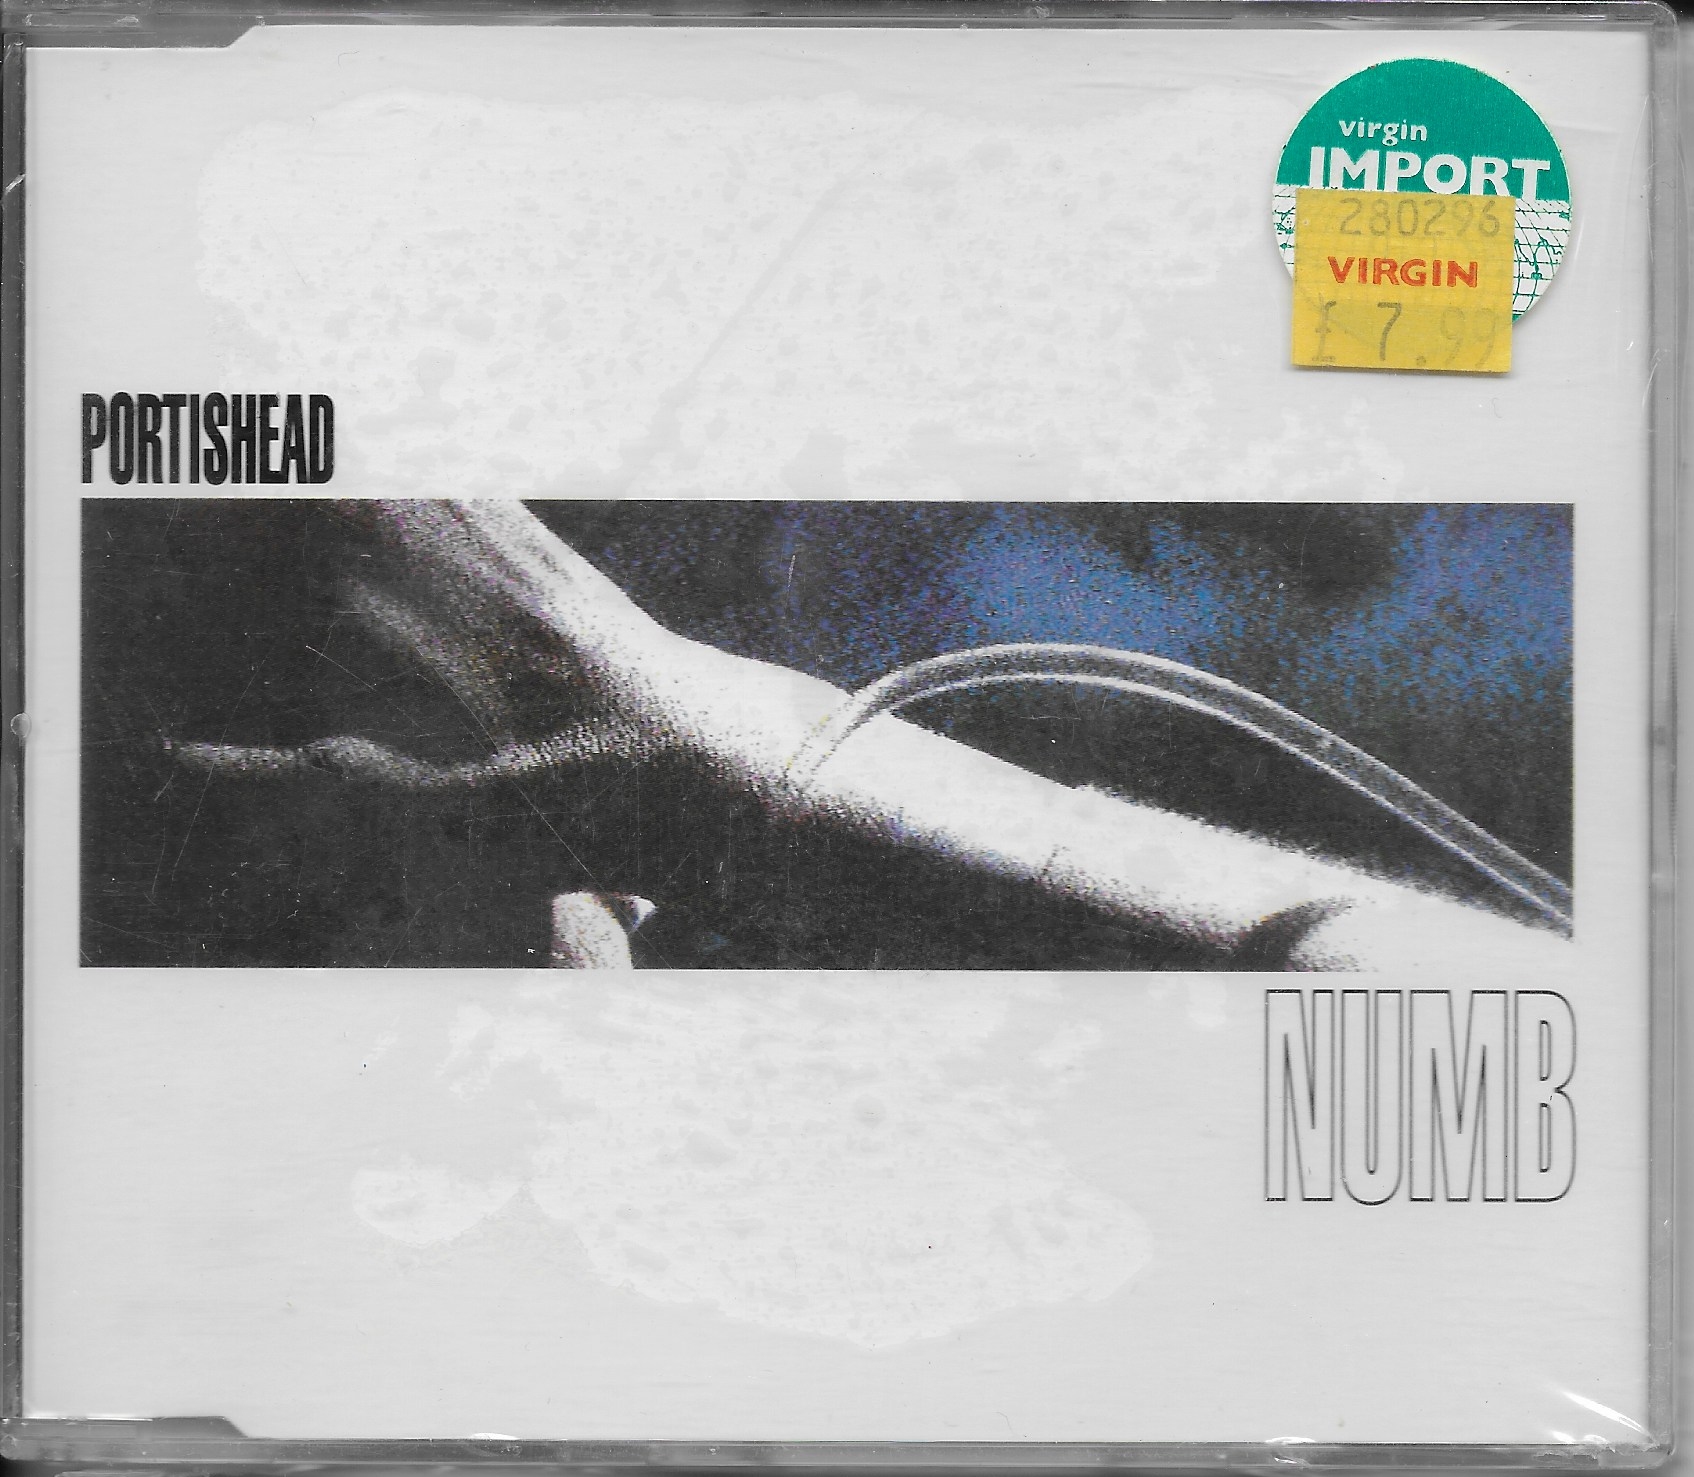 Picture of GODCD 114 Numb - French import by artist Portishead 